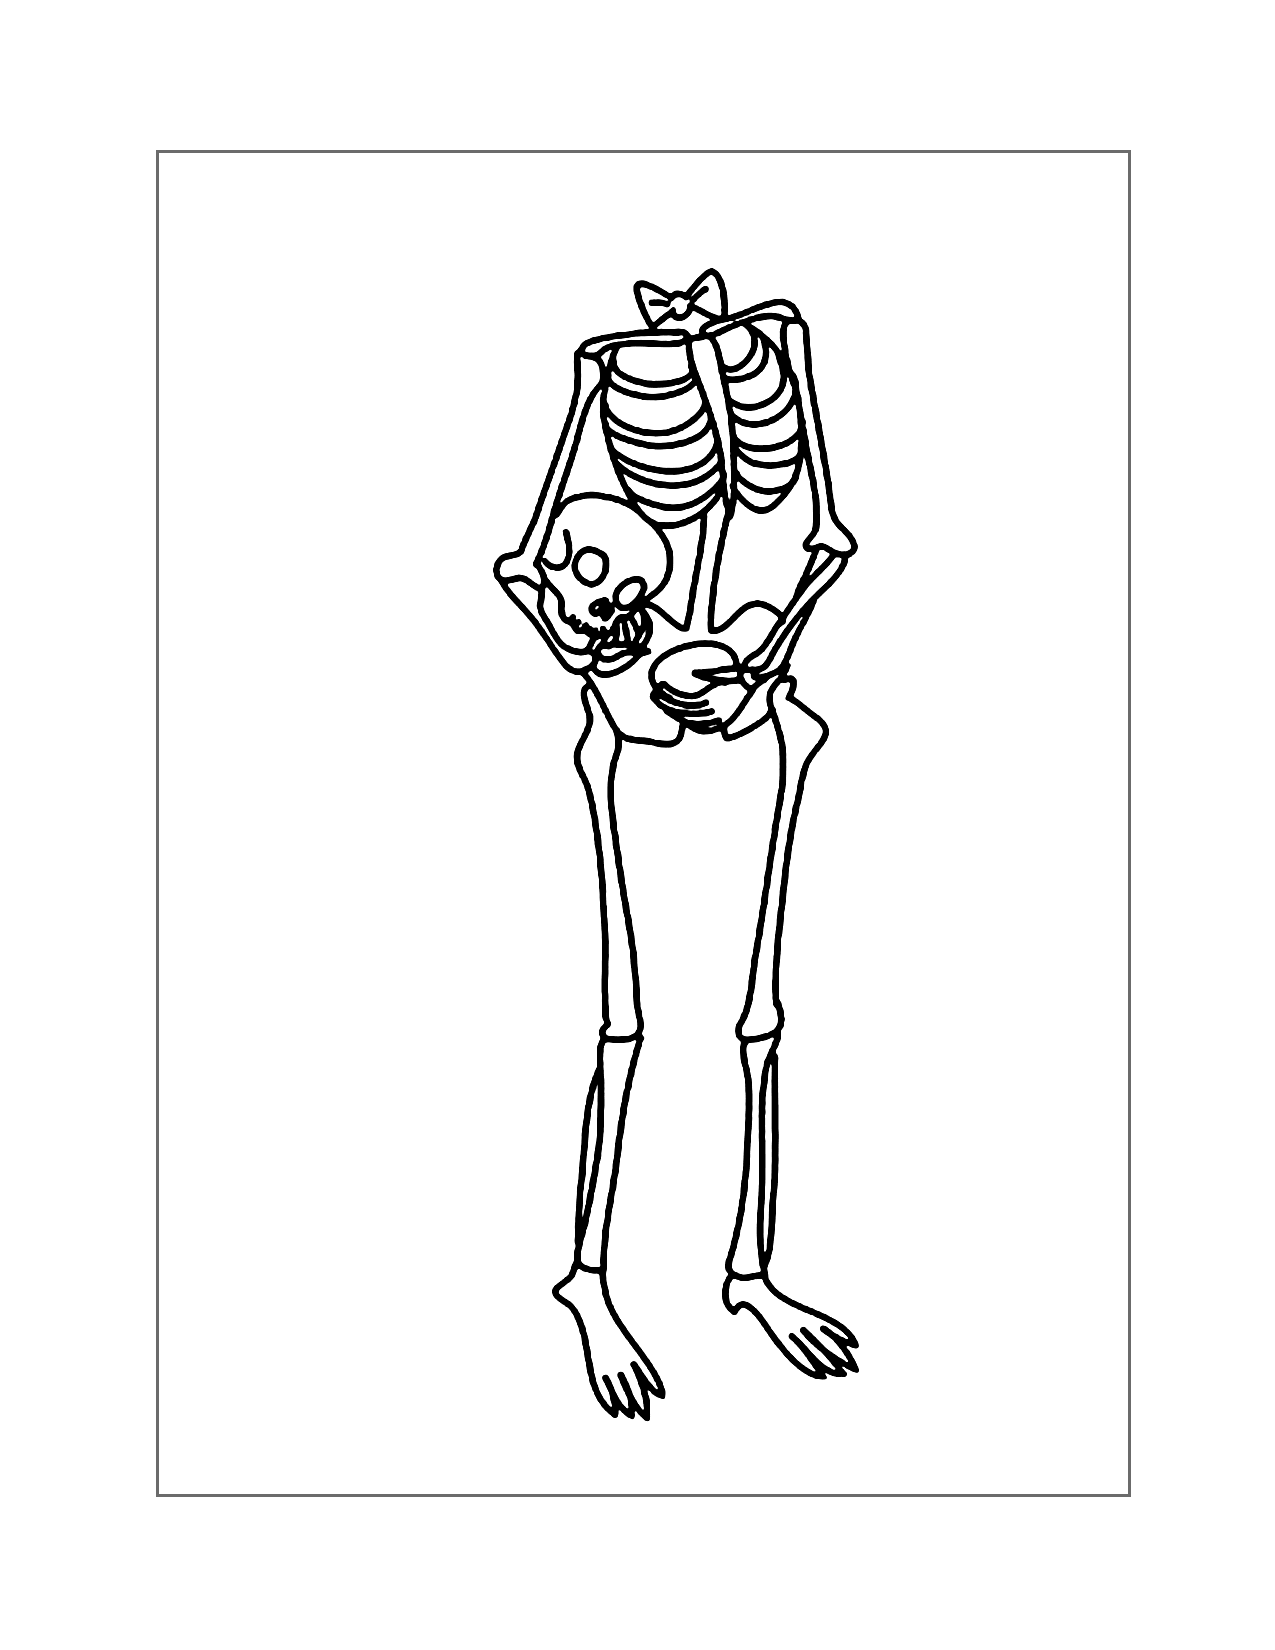 Skeleton Holding Head Coloring Page